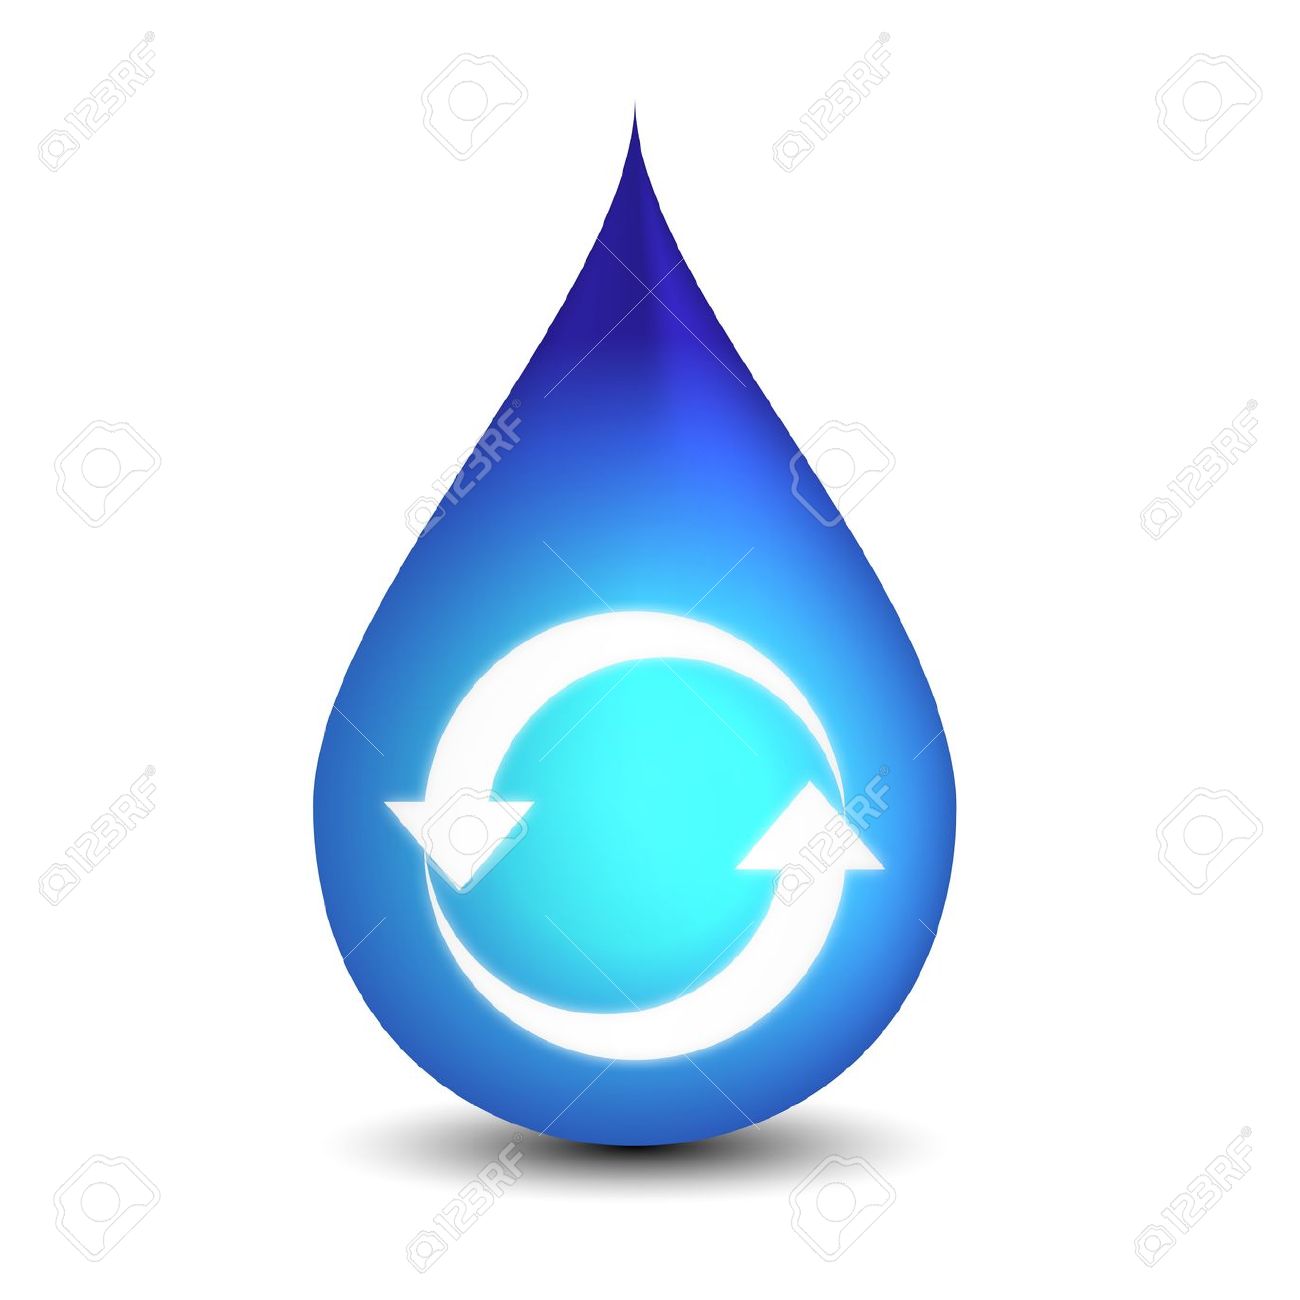 19+ Clean Water Clipart 